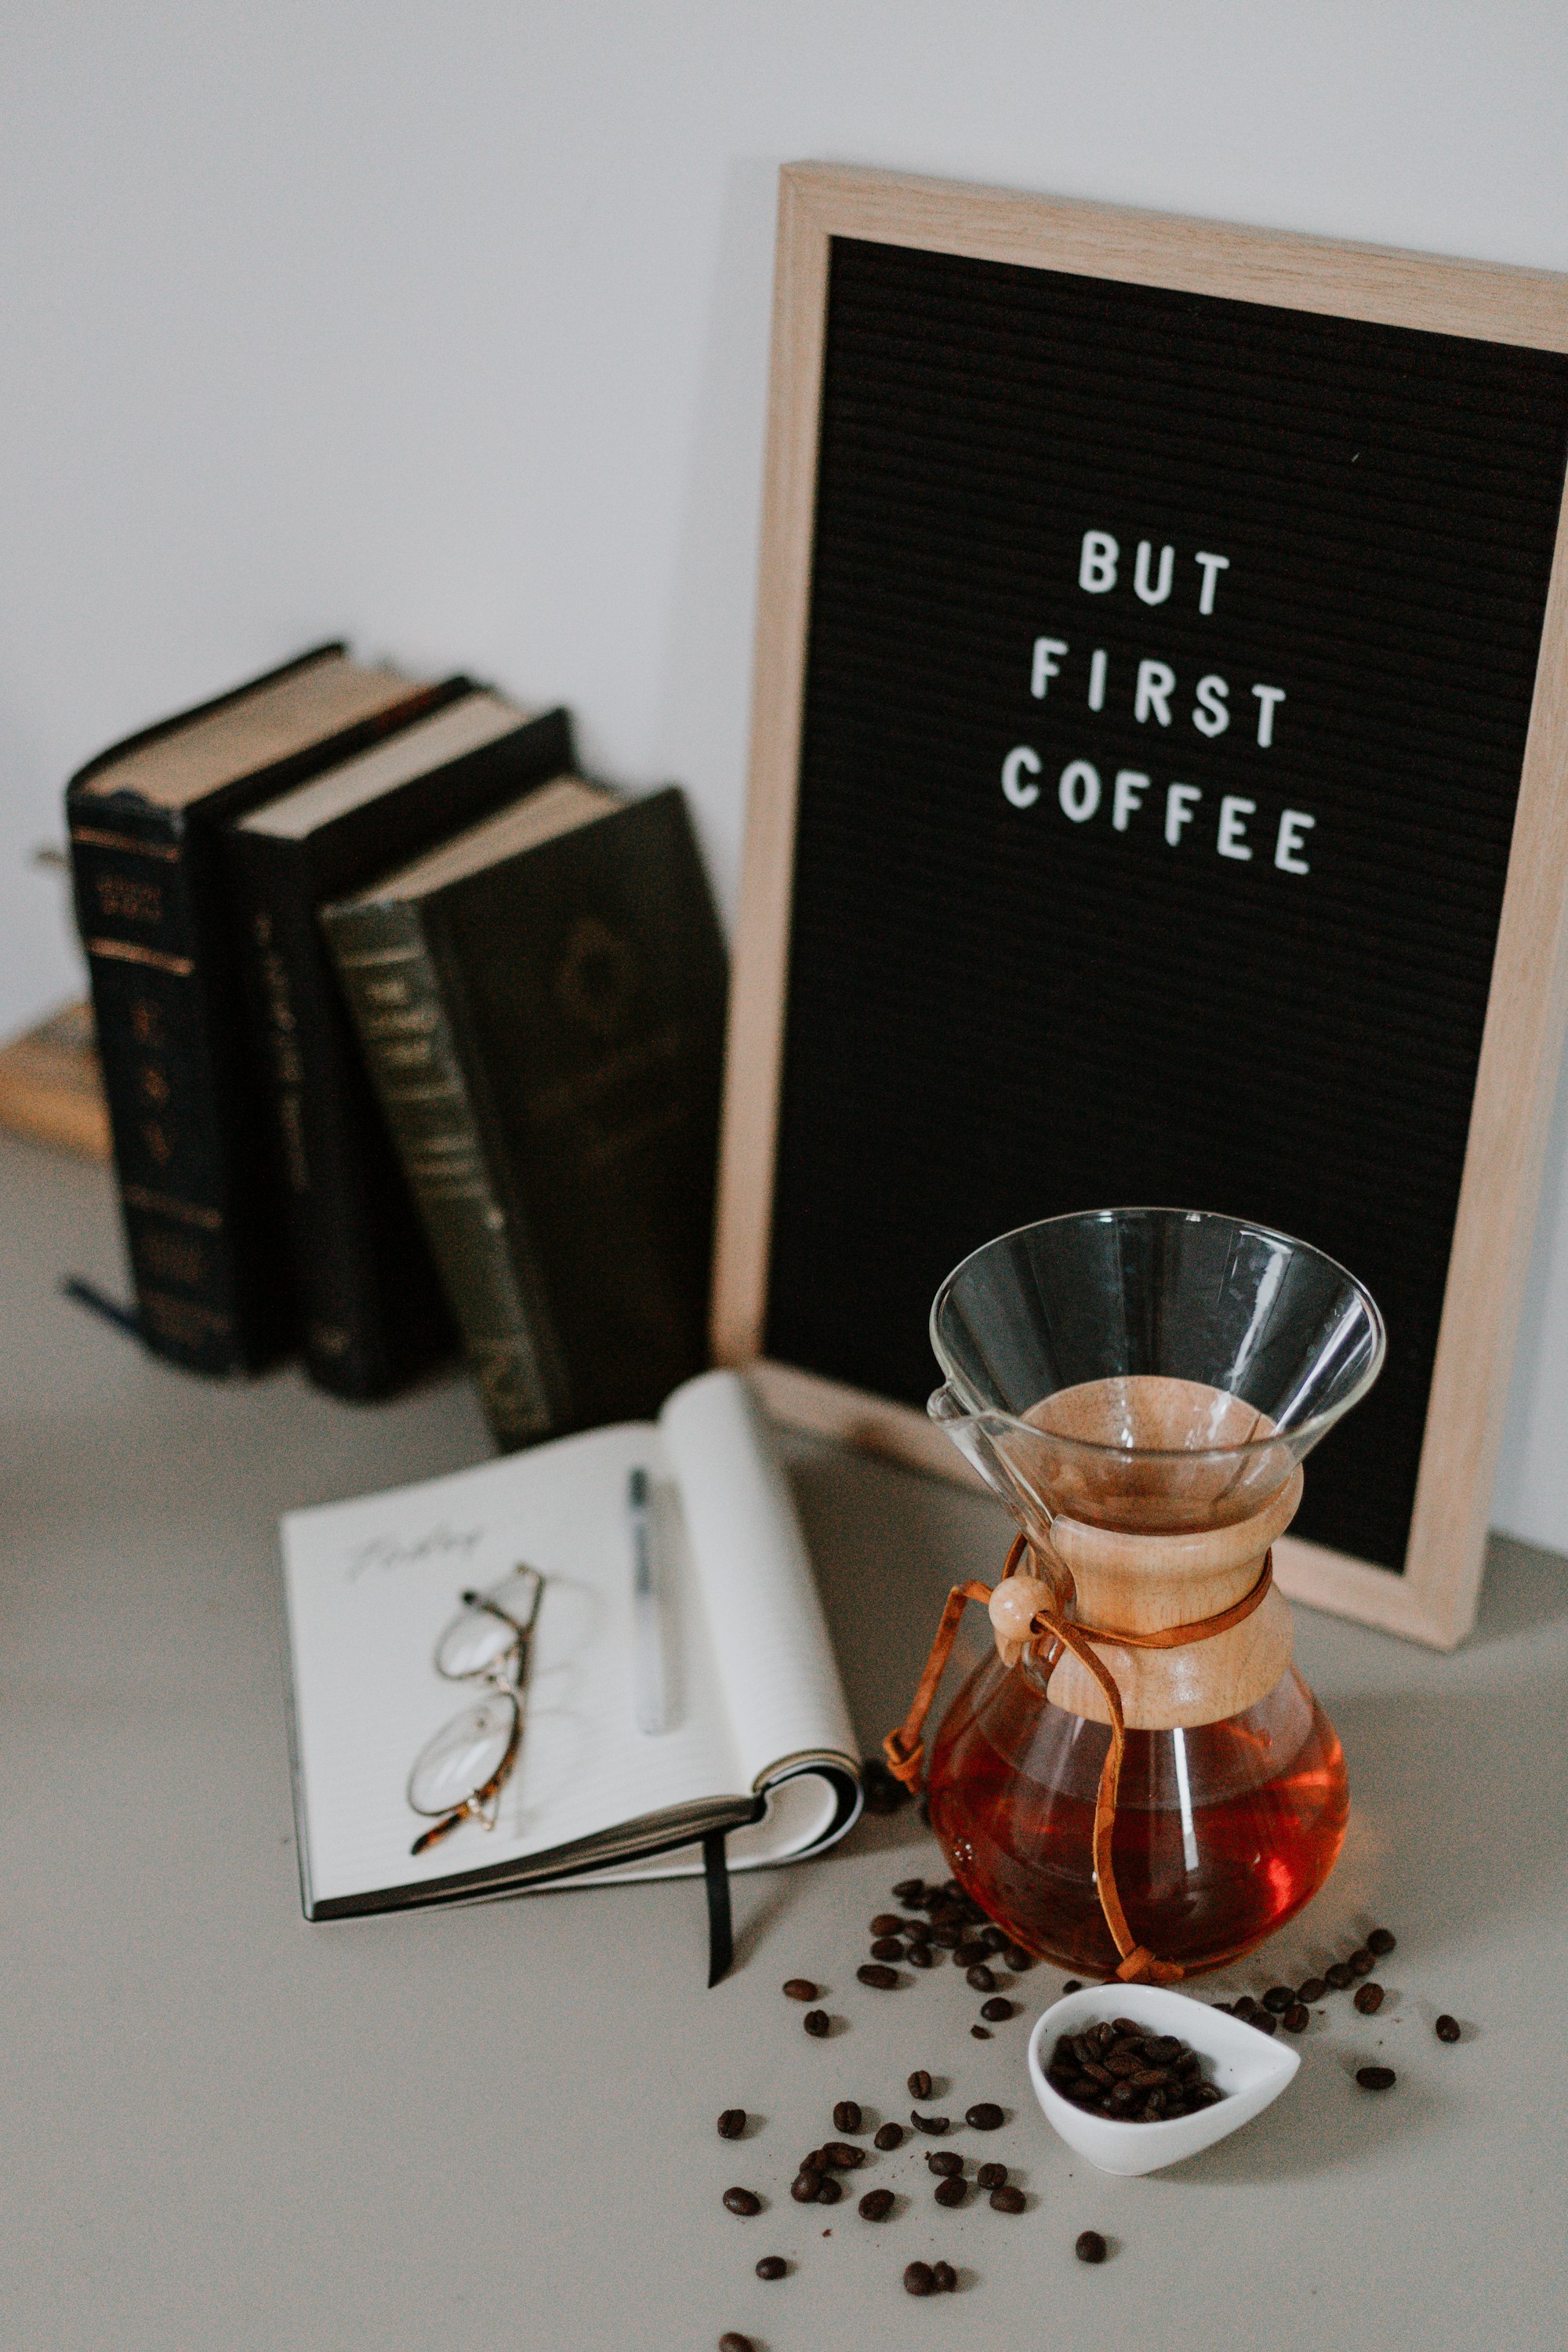 'But first coffee' sign